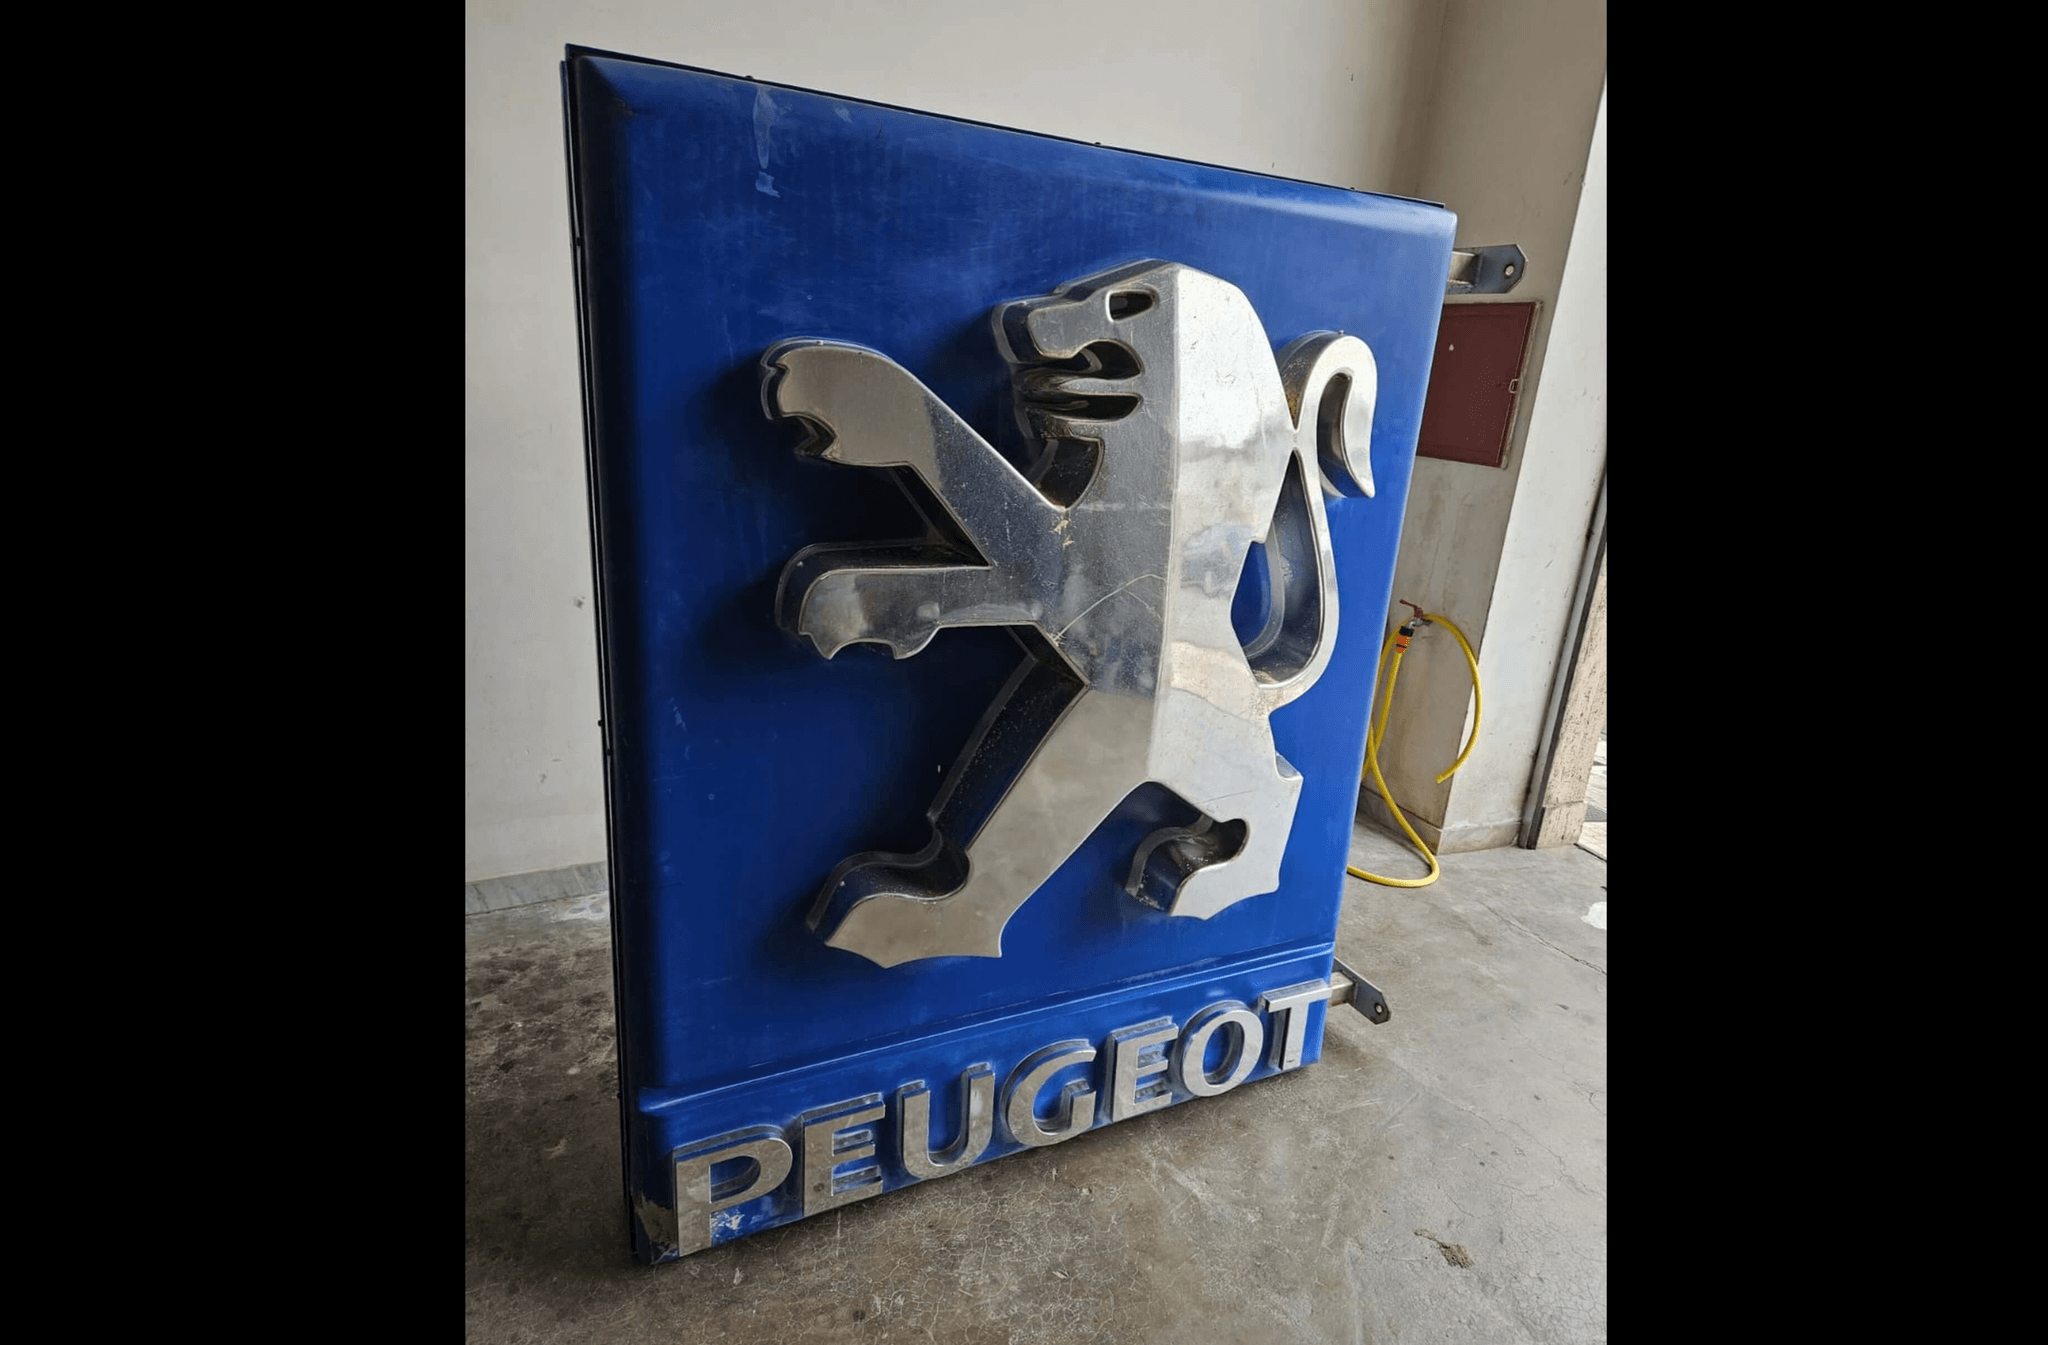 Double Sided Peugeot Sign